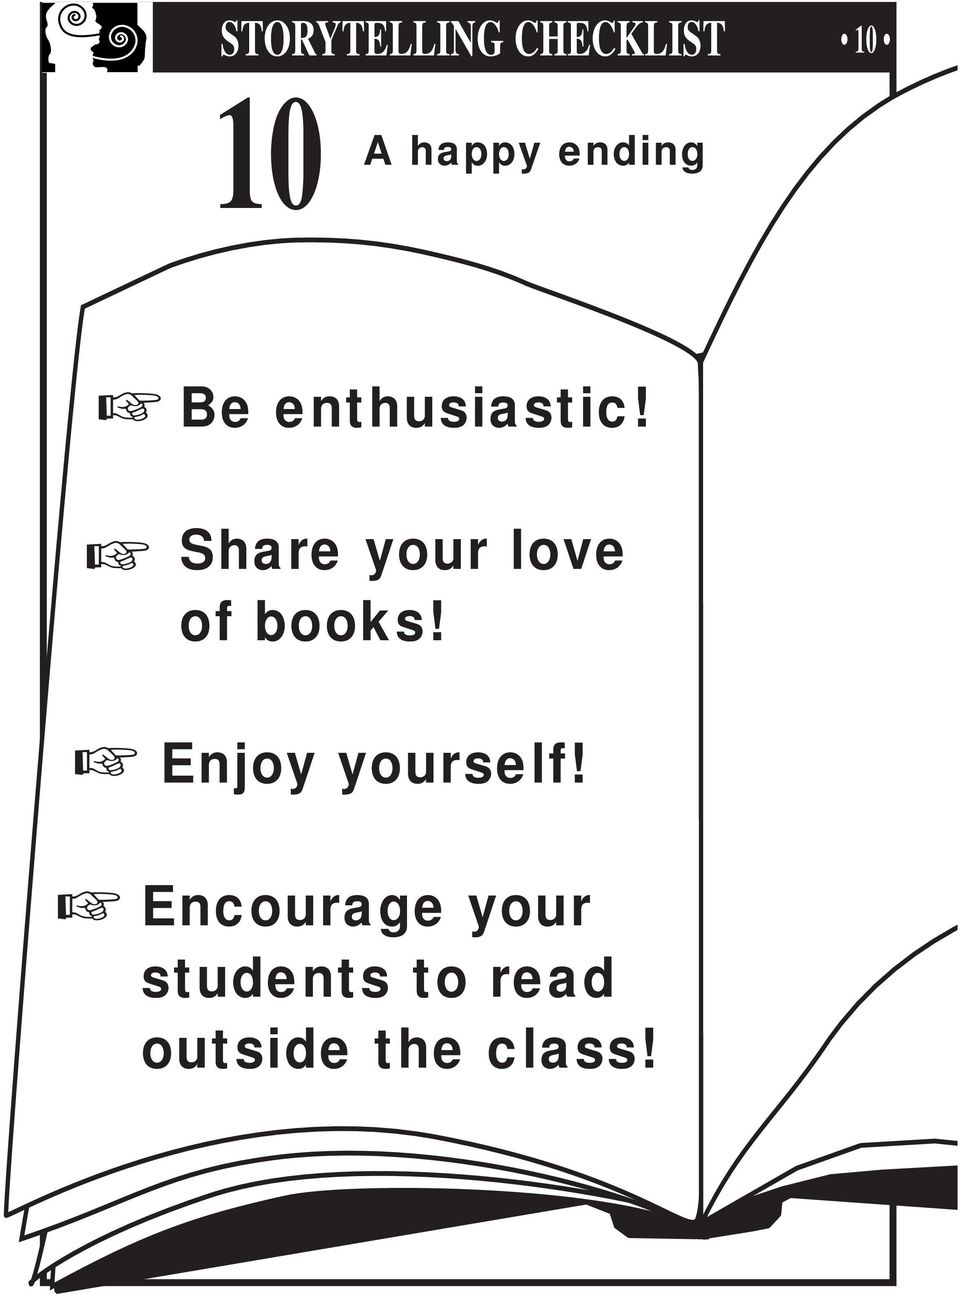 Share your love of books!